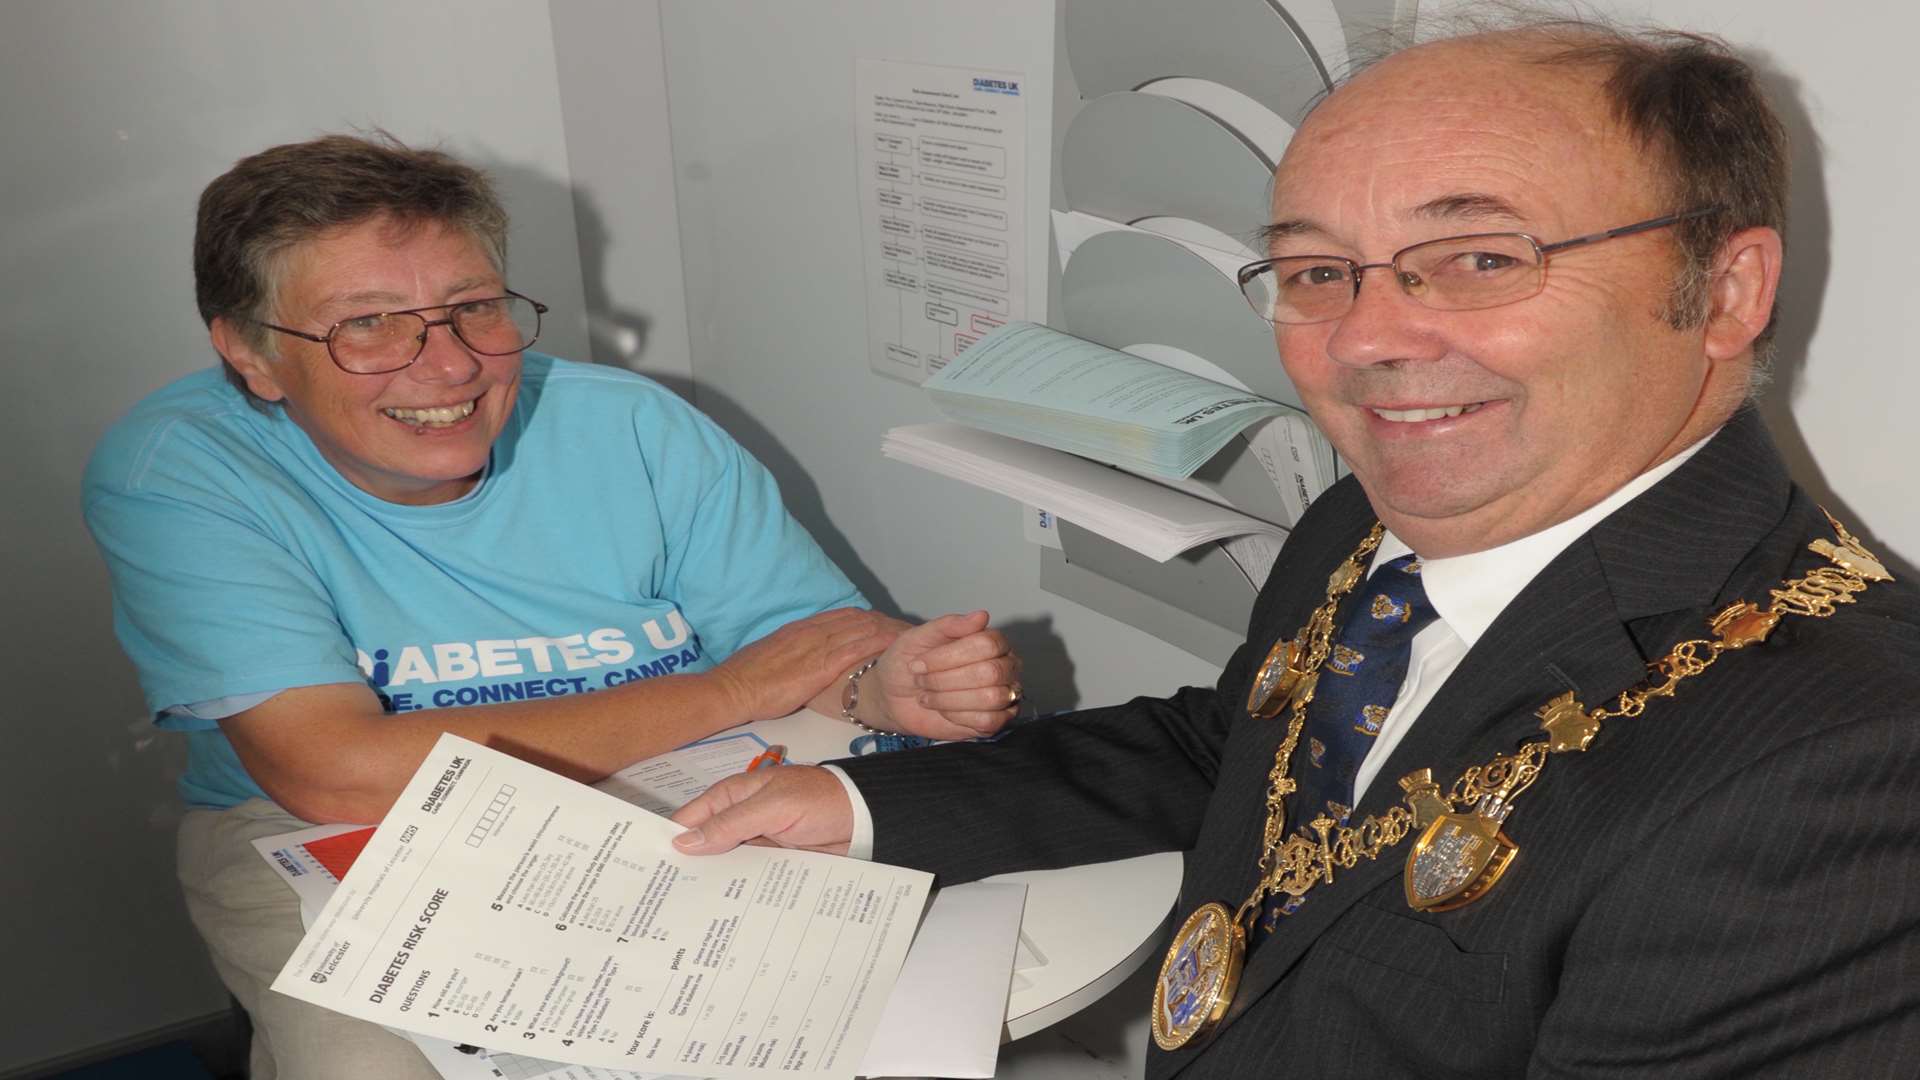 Mayor of Medway Cllr Barry Kemp with Kathy Doughty at the Diabetes UK Roadshow.